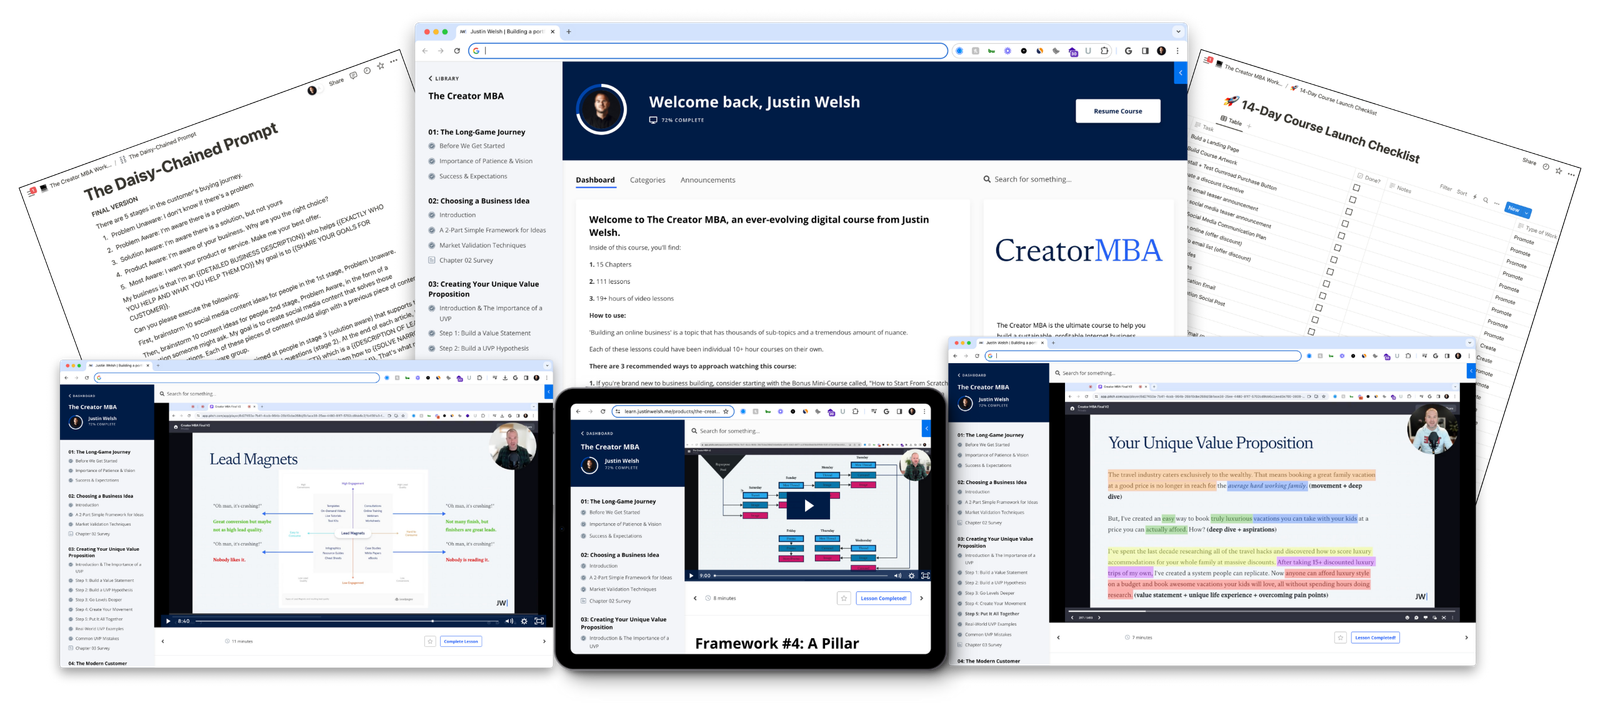 111 Lessons in The Creator MBA: Review